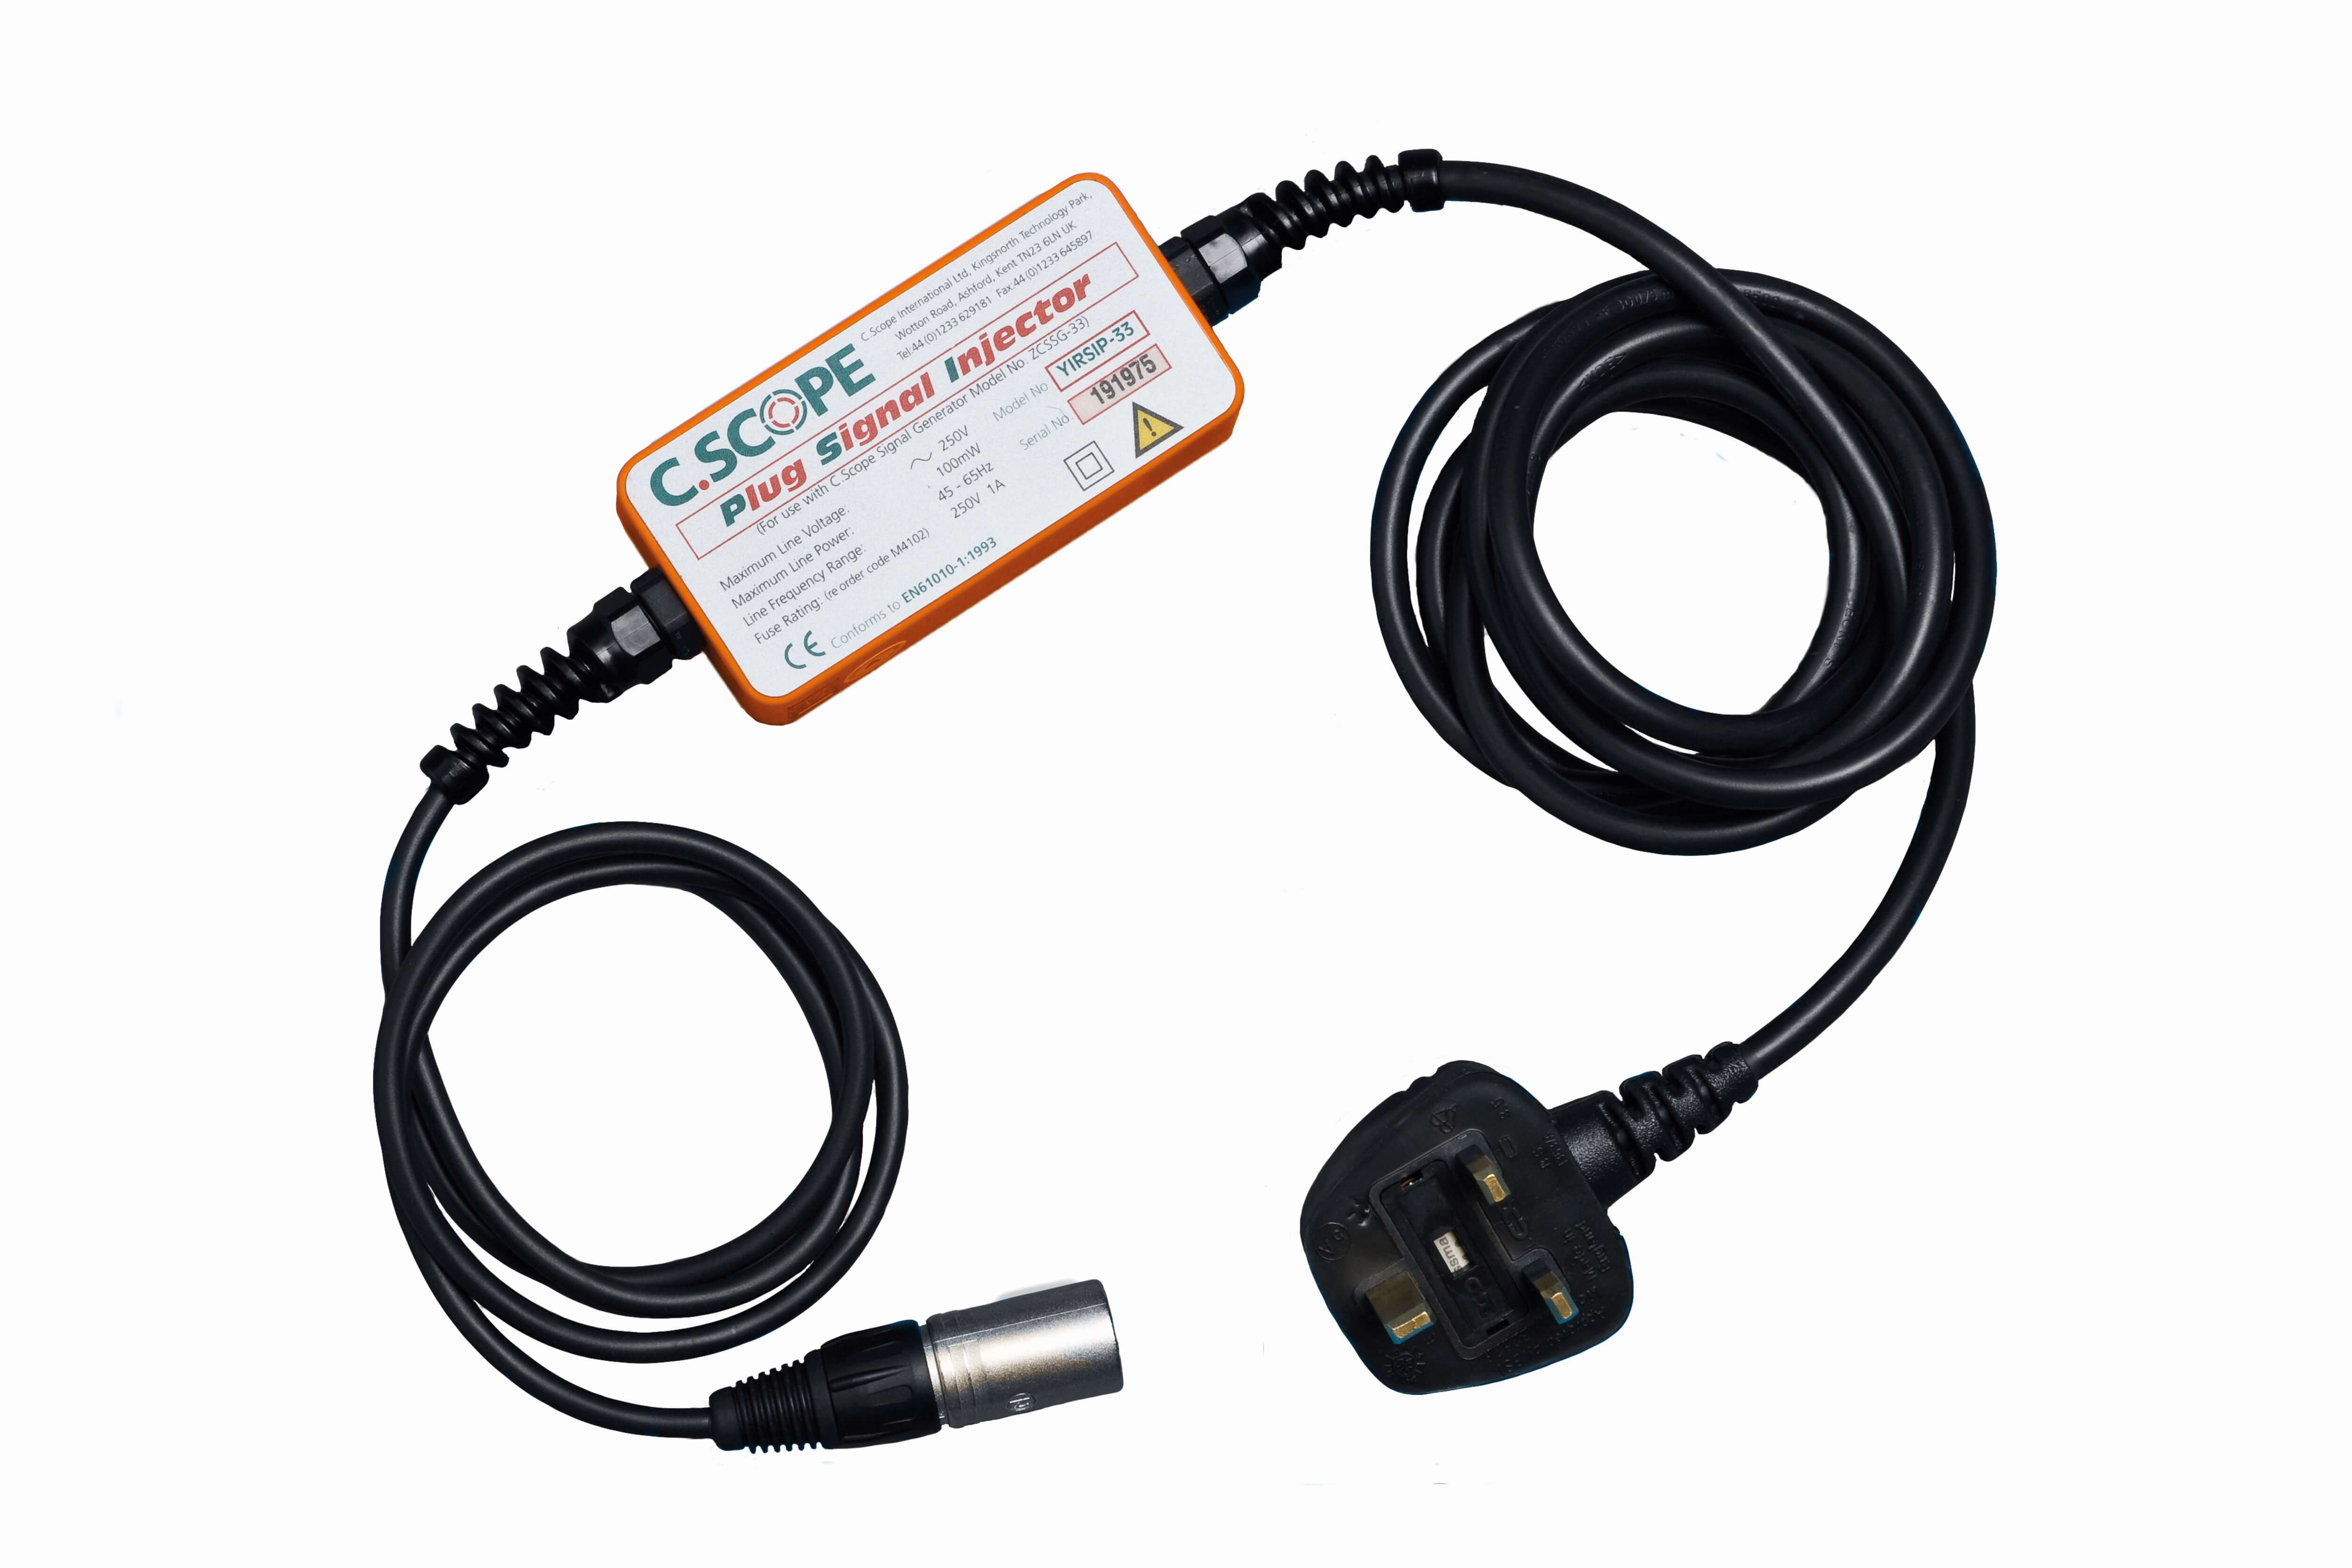 C.Scope Signal Injector - Cable Detector Calibration & Sales